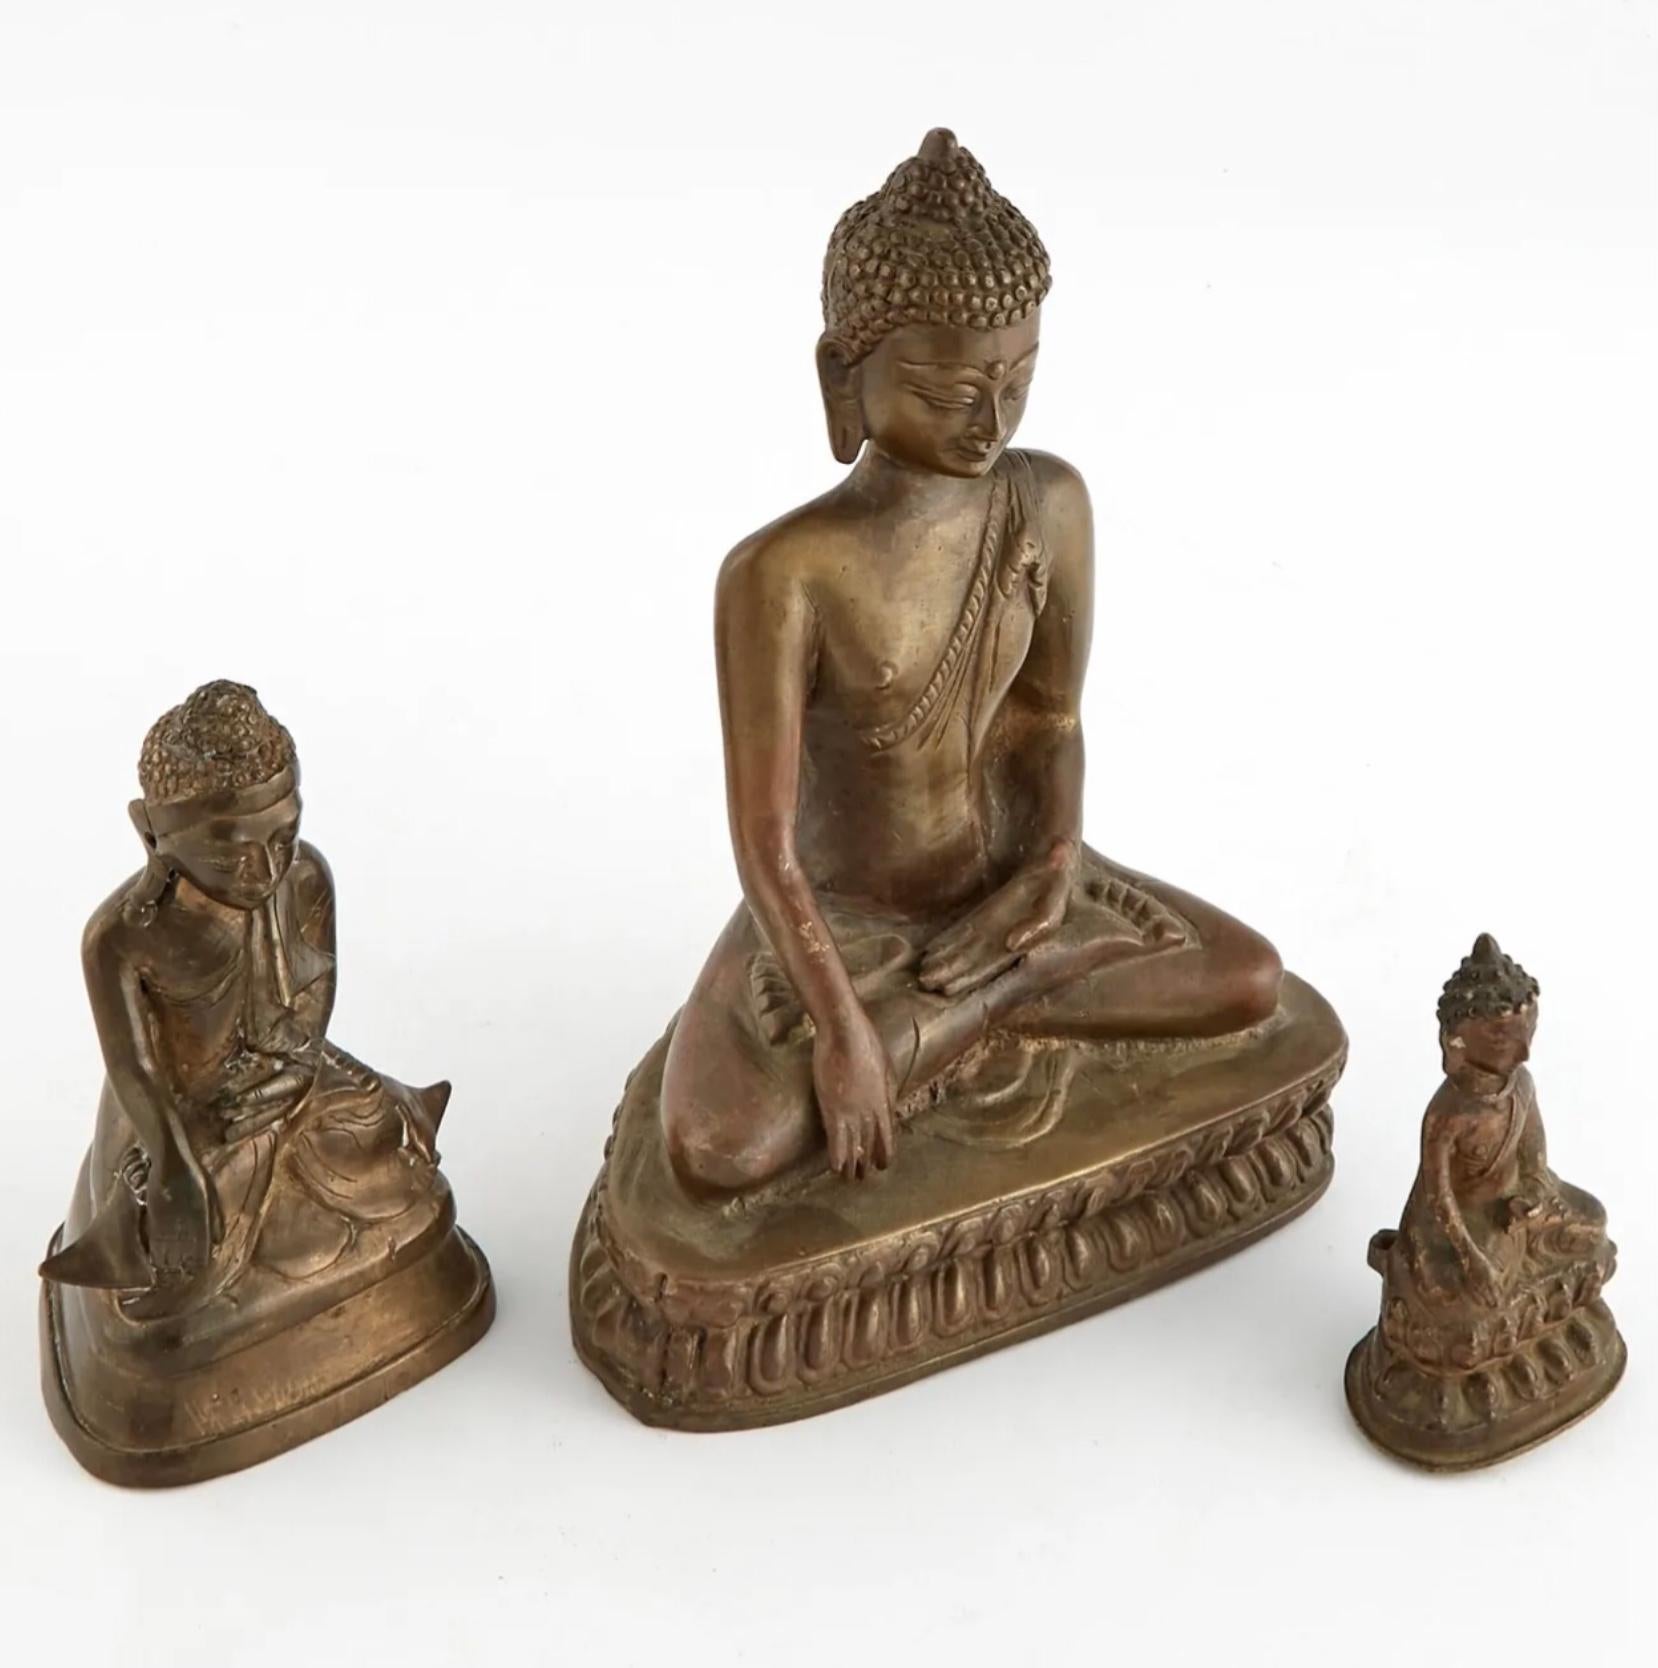 Comprising a Burmese and two Nepalese figures of the seated Buddha.

Height of tallest 7.75 x 6 x 3,75 inches.  19th century
Medium: 5 Inches.  19th century
Smallest: 3.75 Inches.  18th century

Condition: Good with wear commensurate of age.
